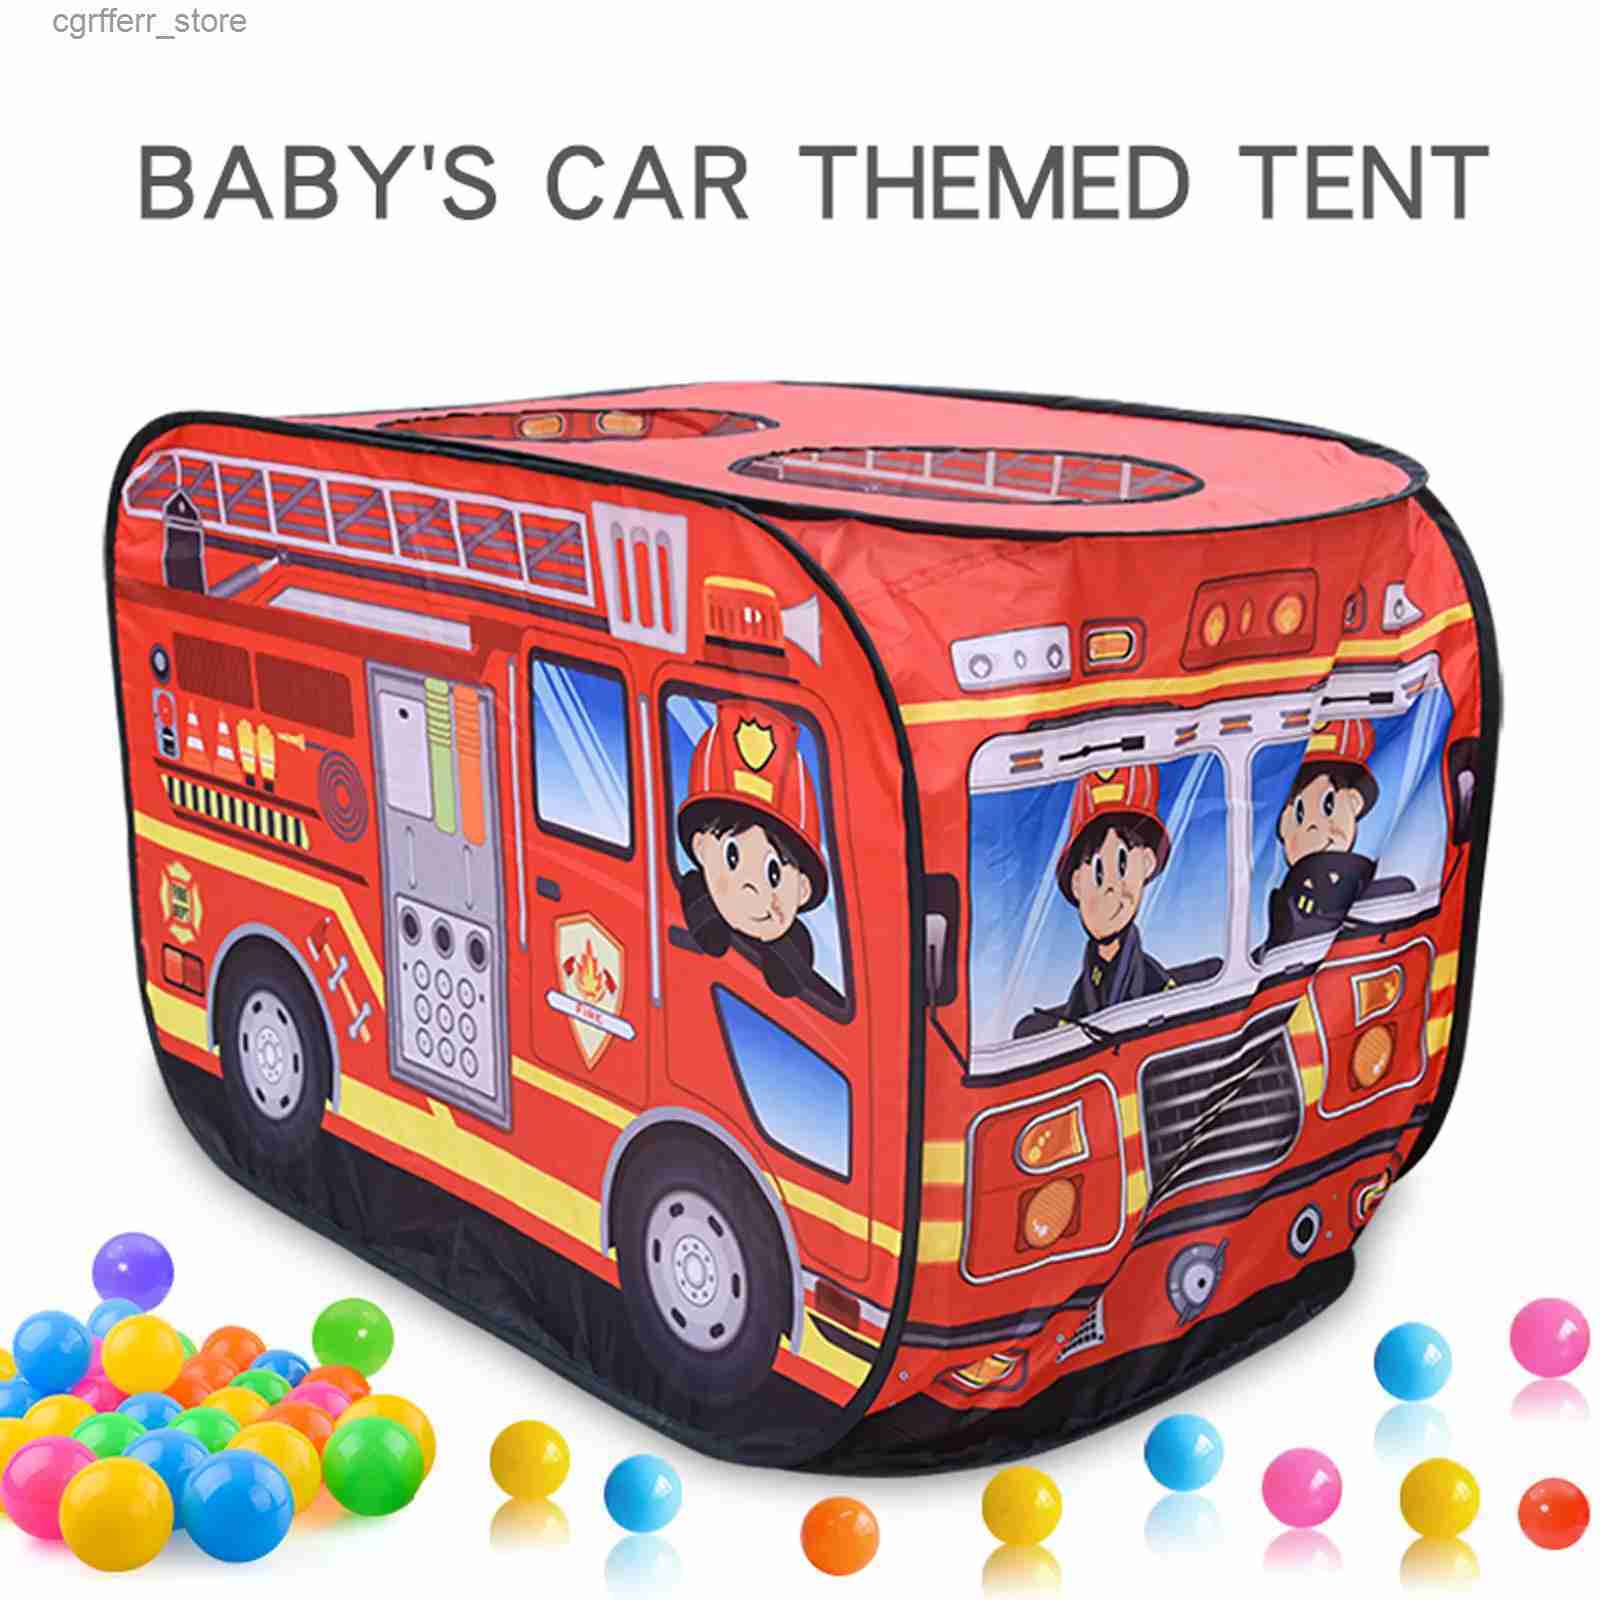 Toy Tents Childrens Car Tent House Fire House Indoor and Outdoor Game House with Sonrack Toys L410